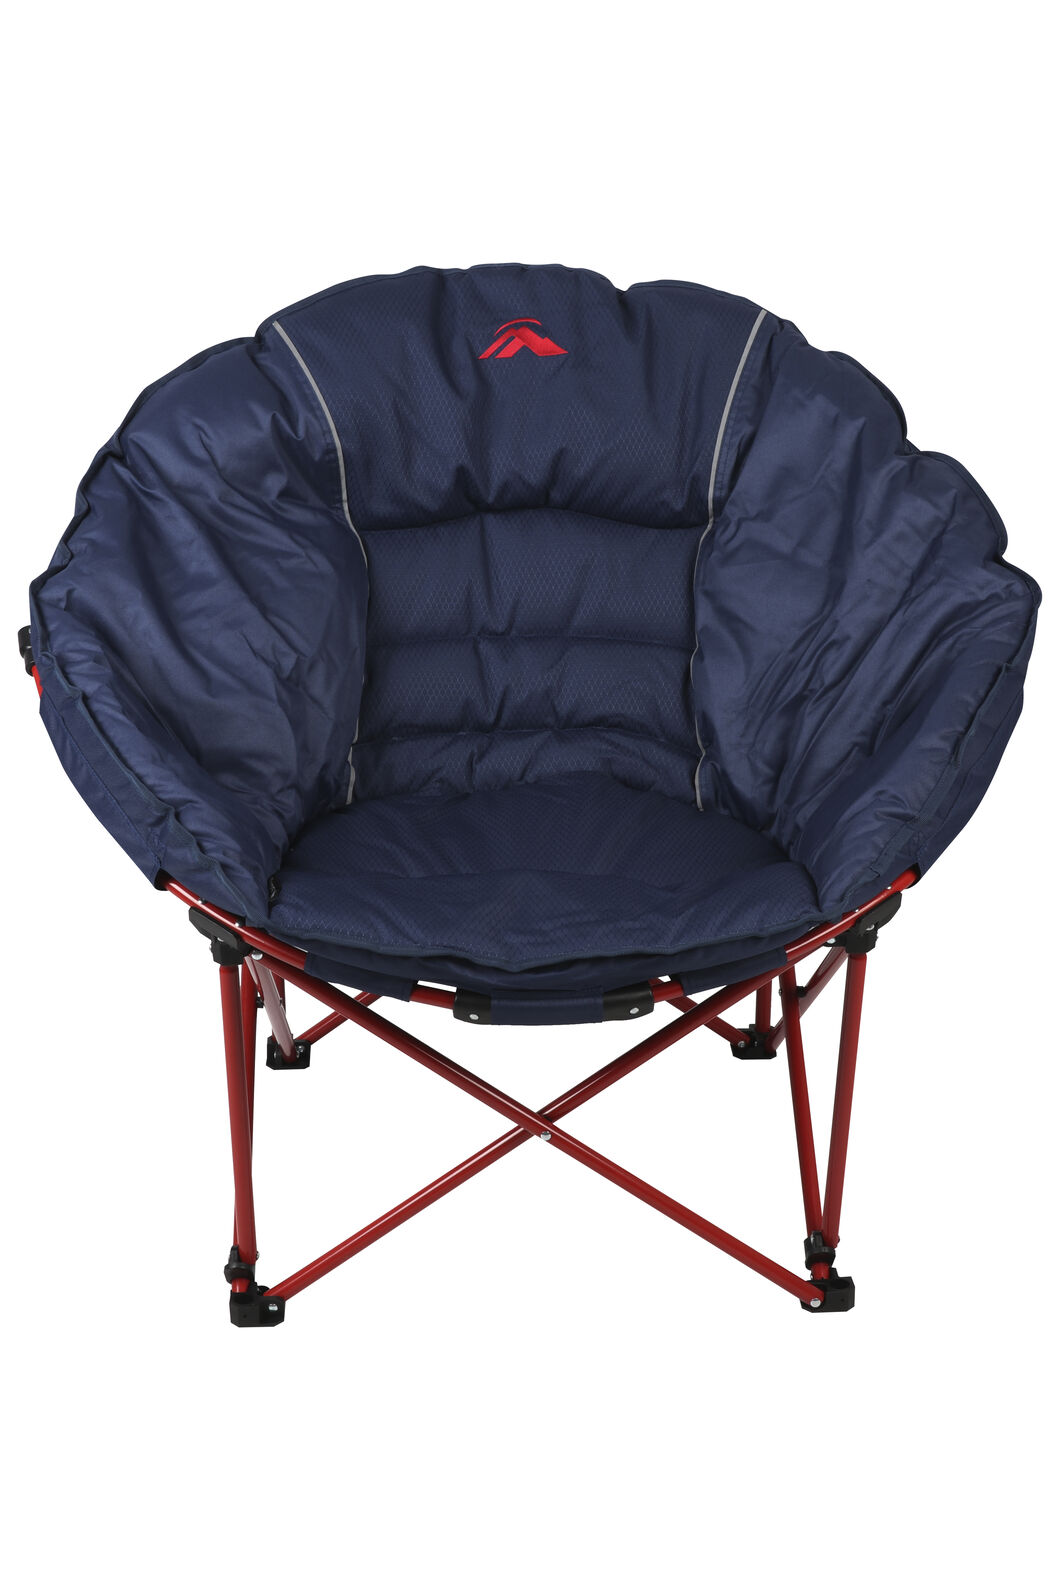  Buy Moon Chair Nz for Large Space